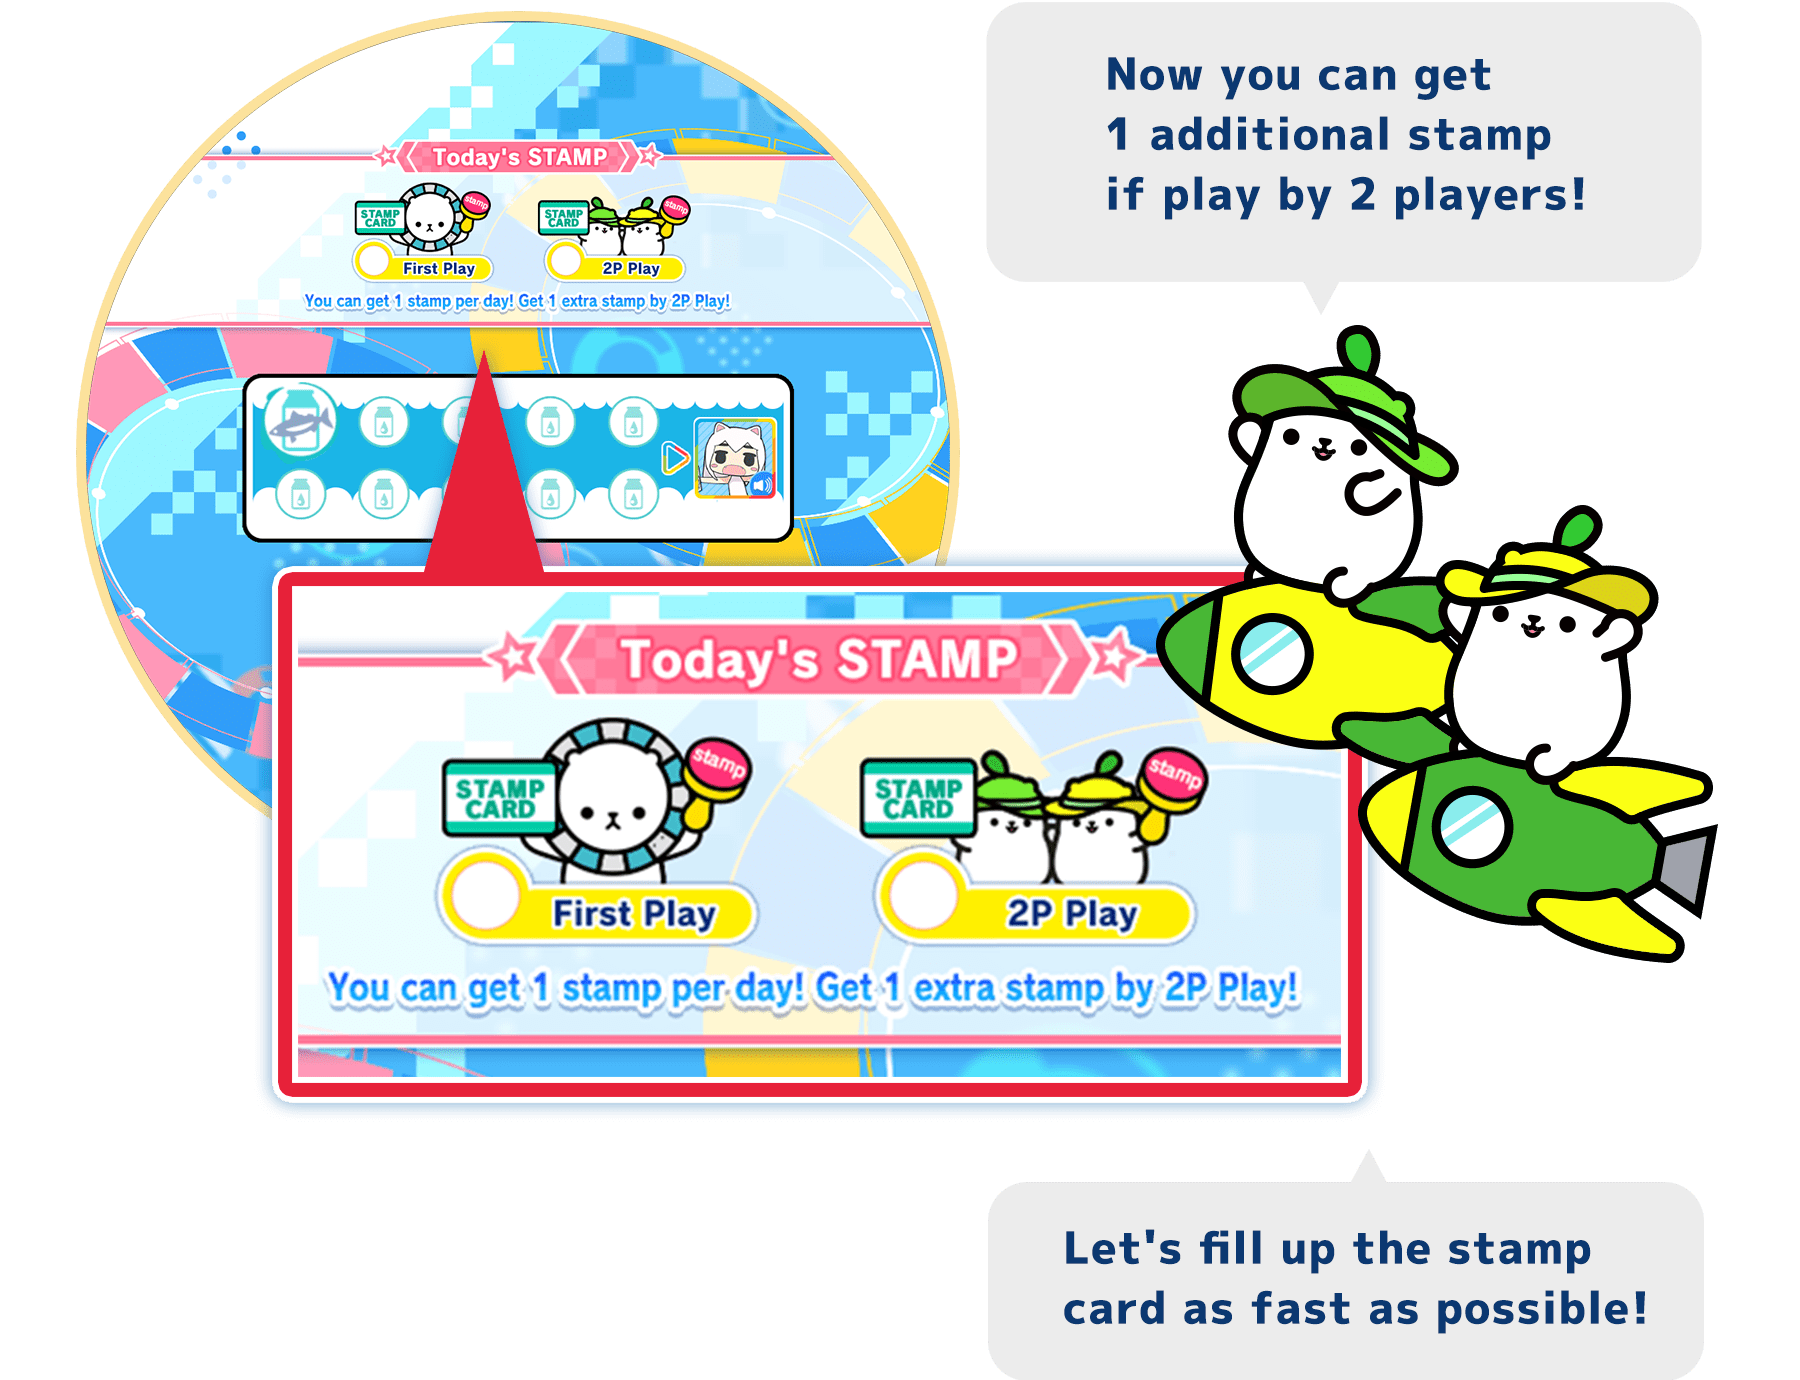 
          Now you can get 1 additional stamp if play by 2 players
          Let's fill up the stamp card as fast as possible!